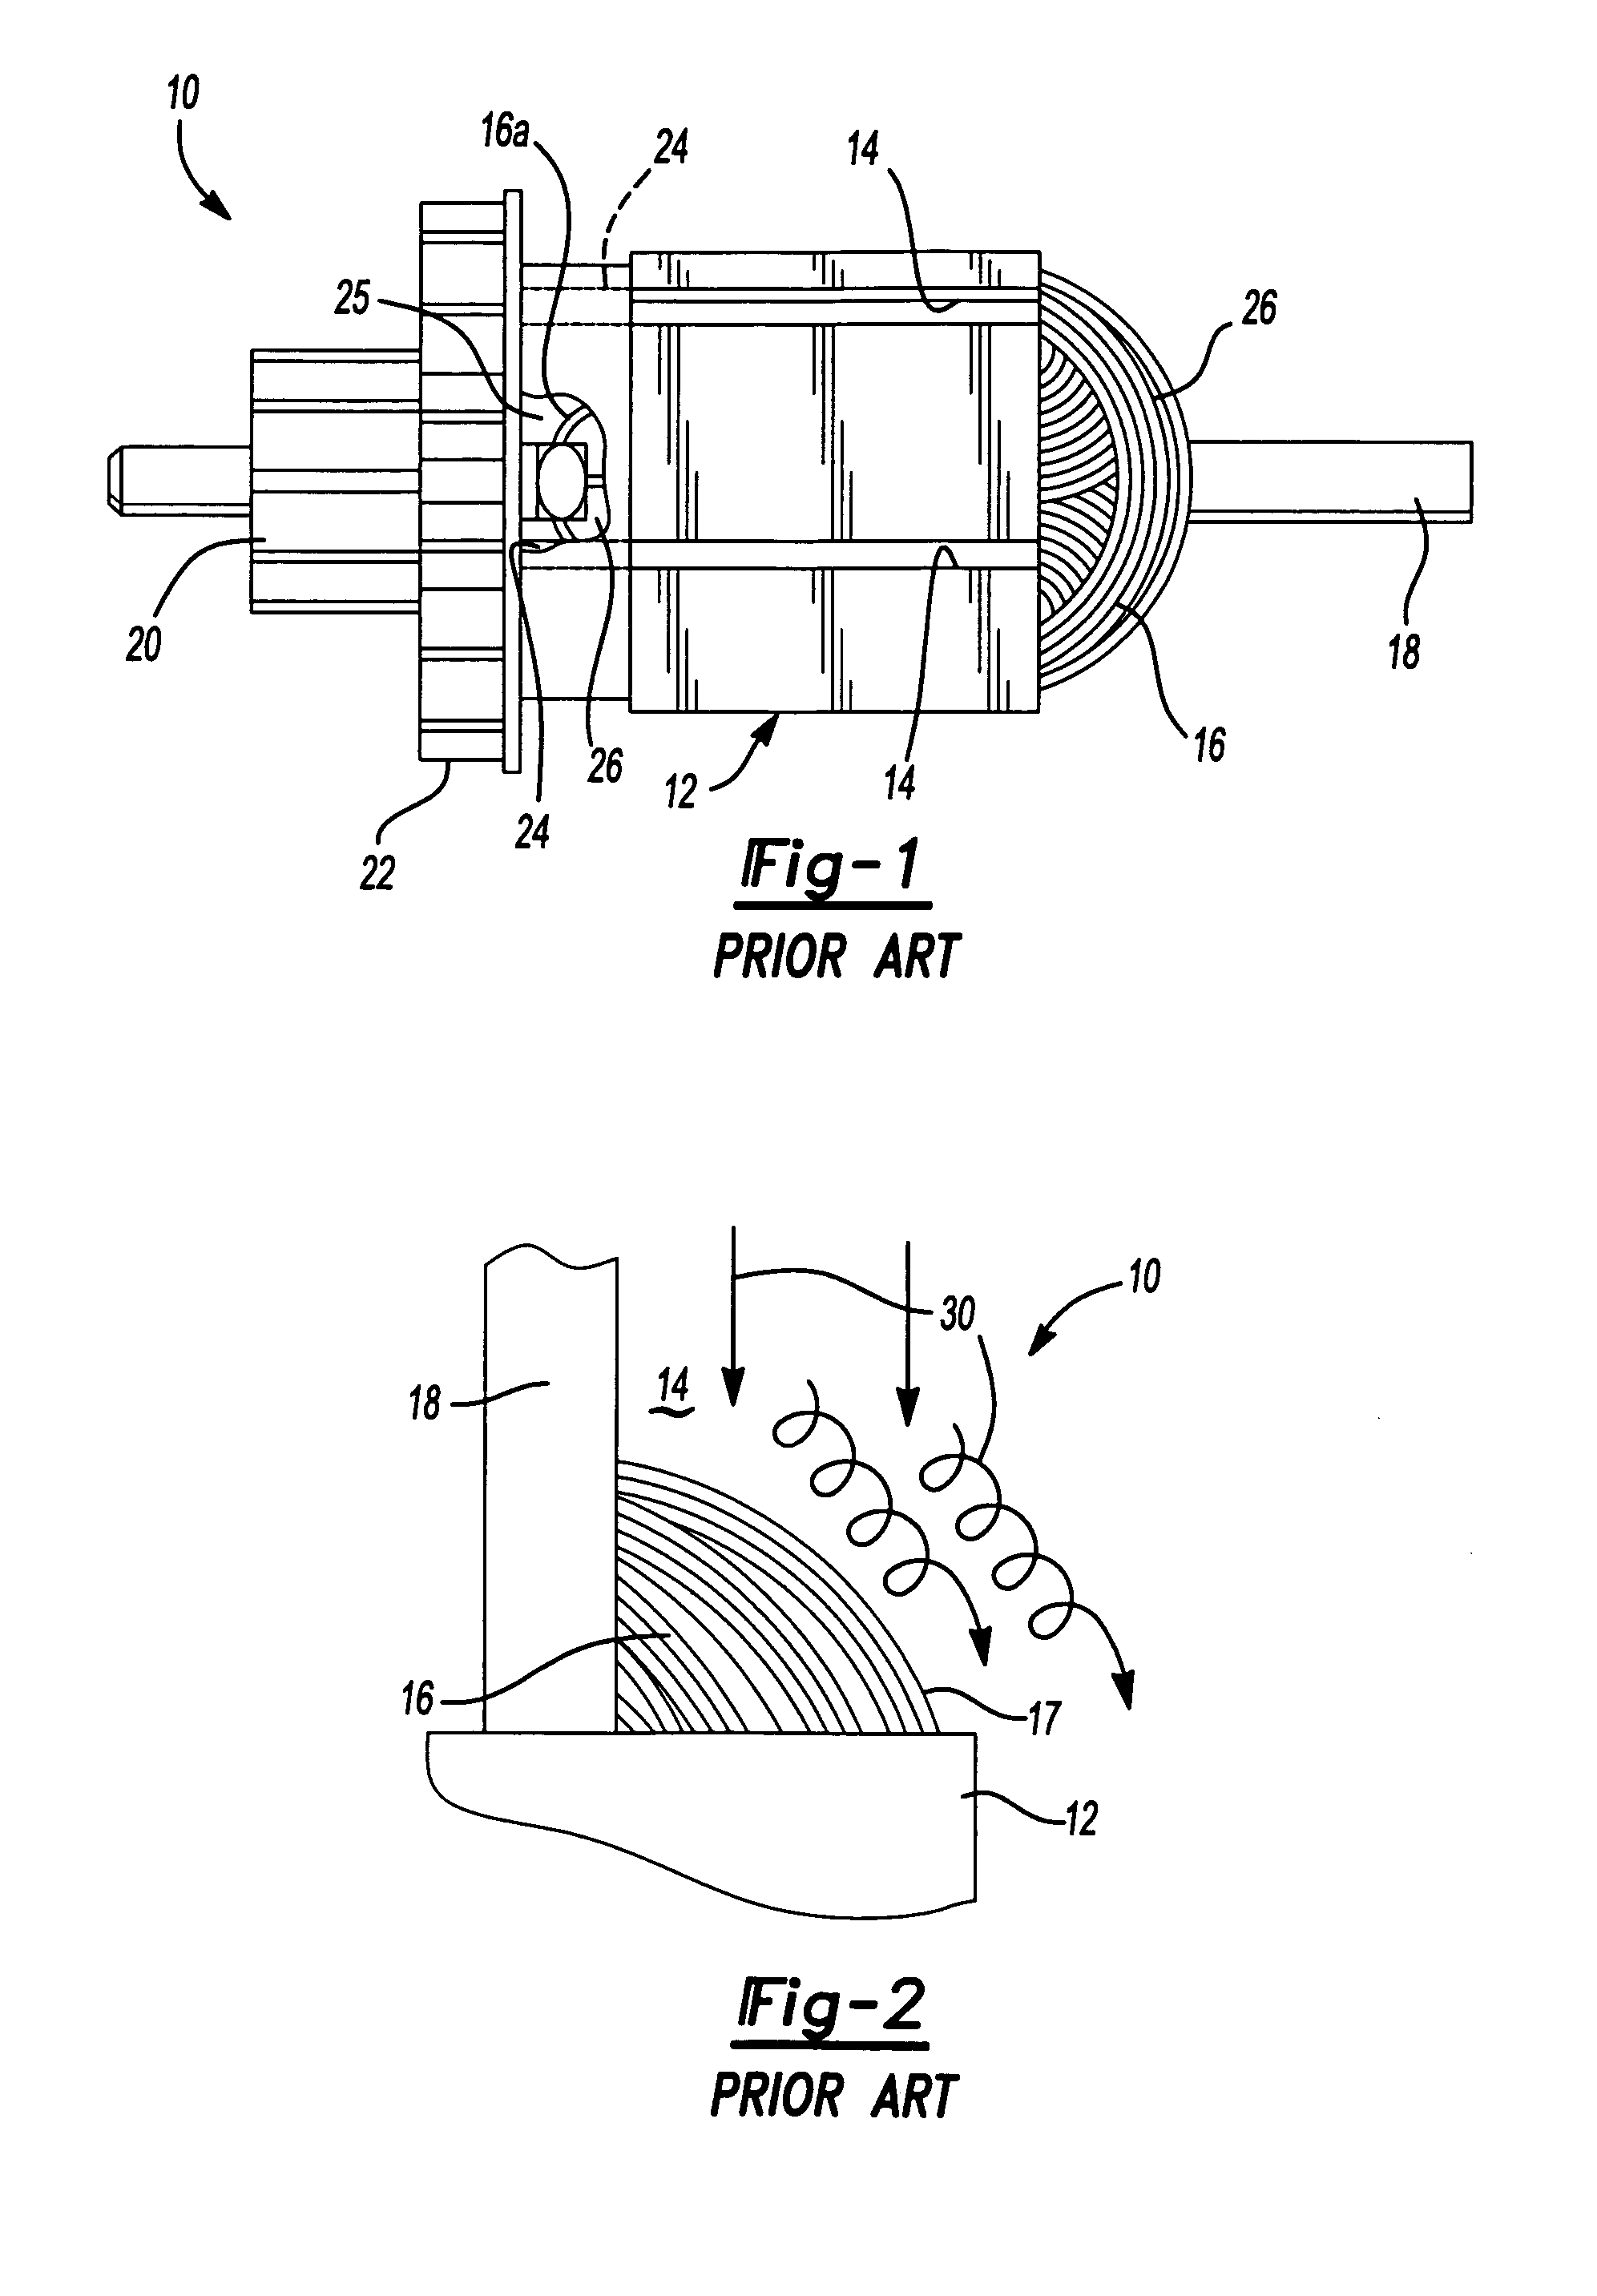 Method of forming a power tool